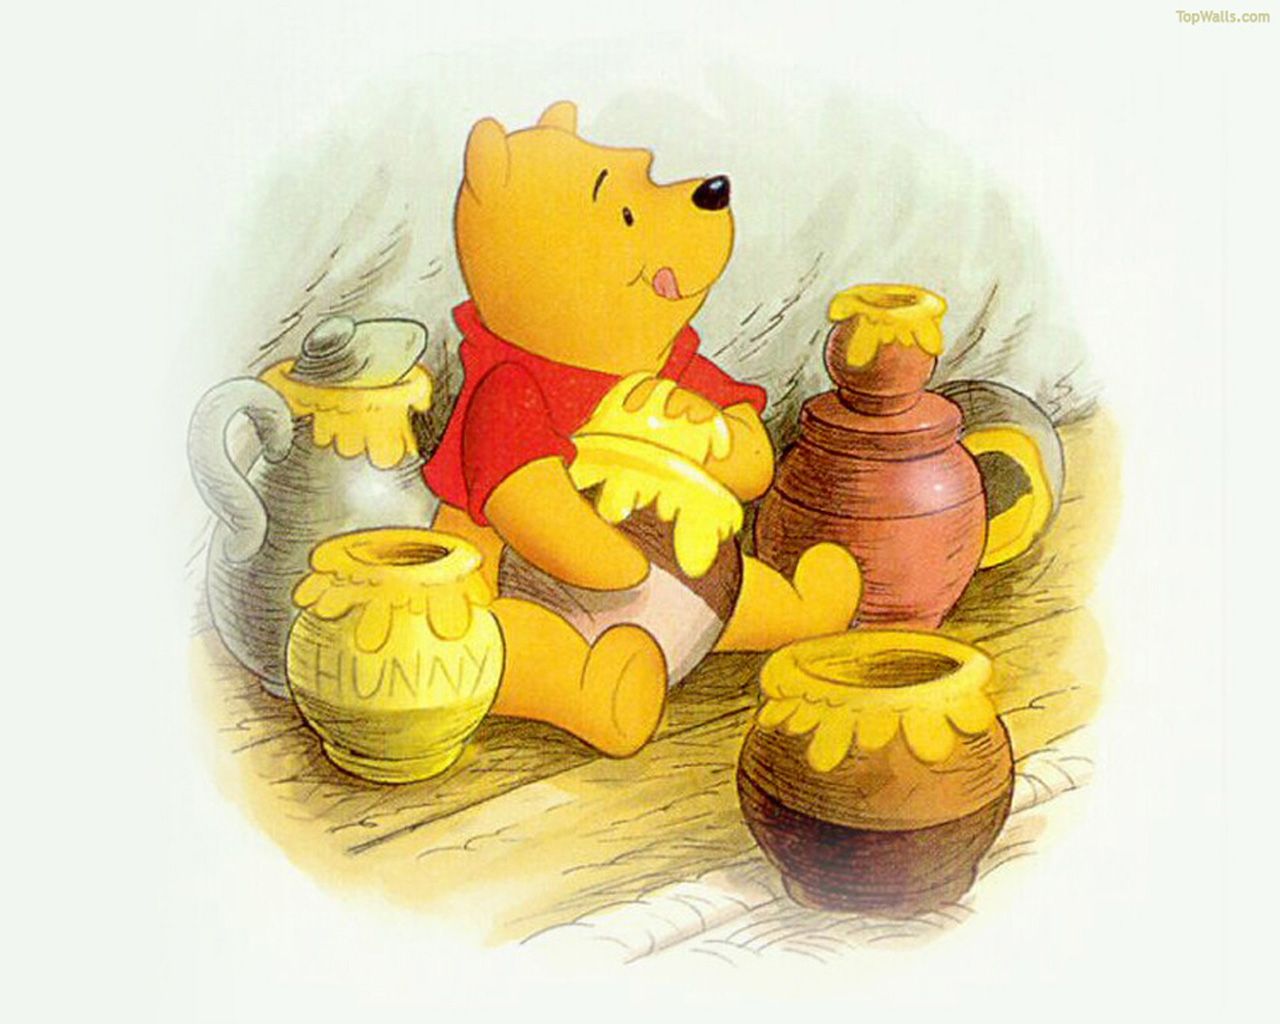 Winnie the Pooh Full HD Wallpaper Image for Tablet - Cartoons ...